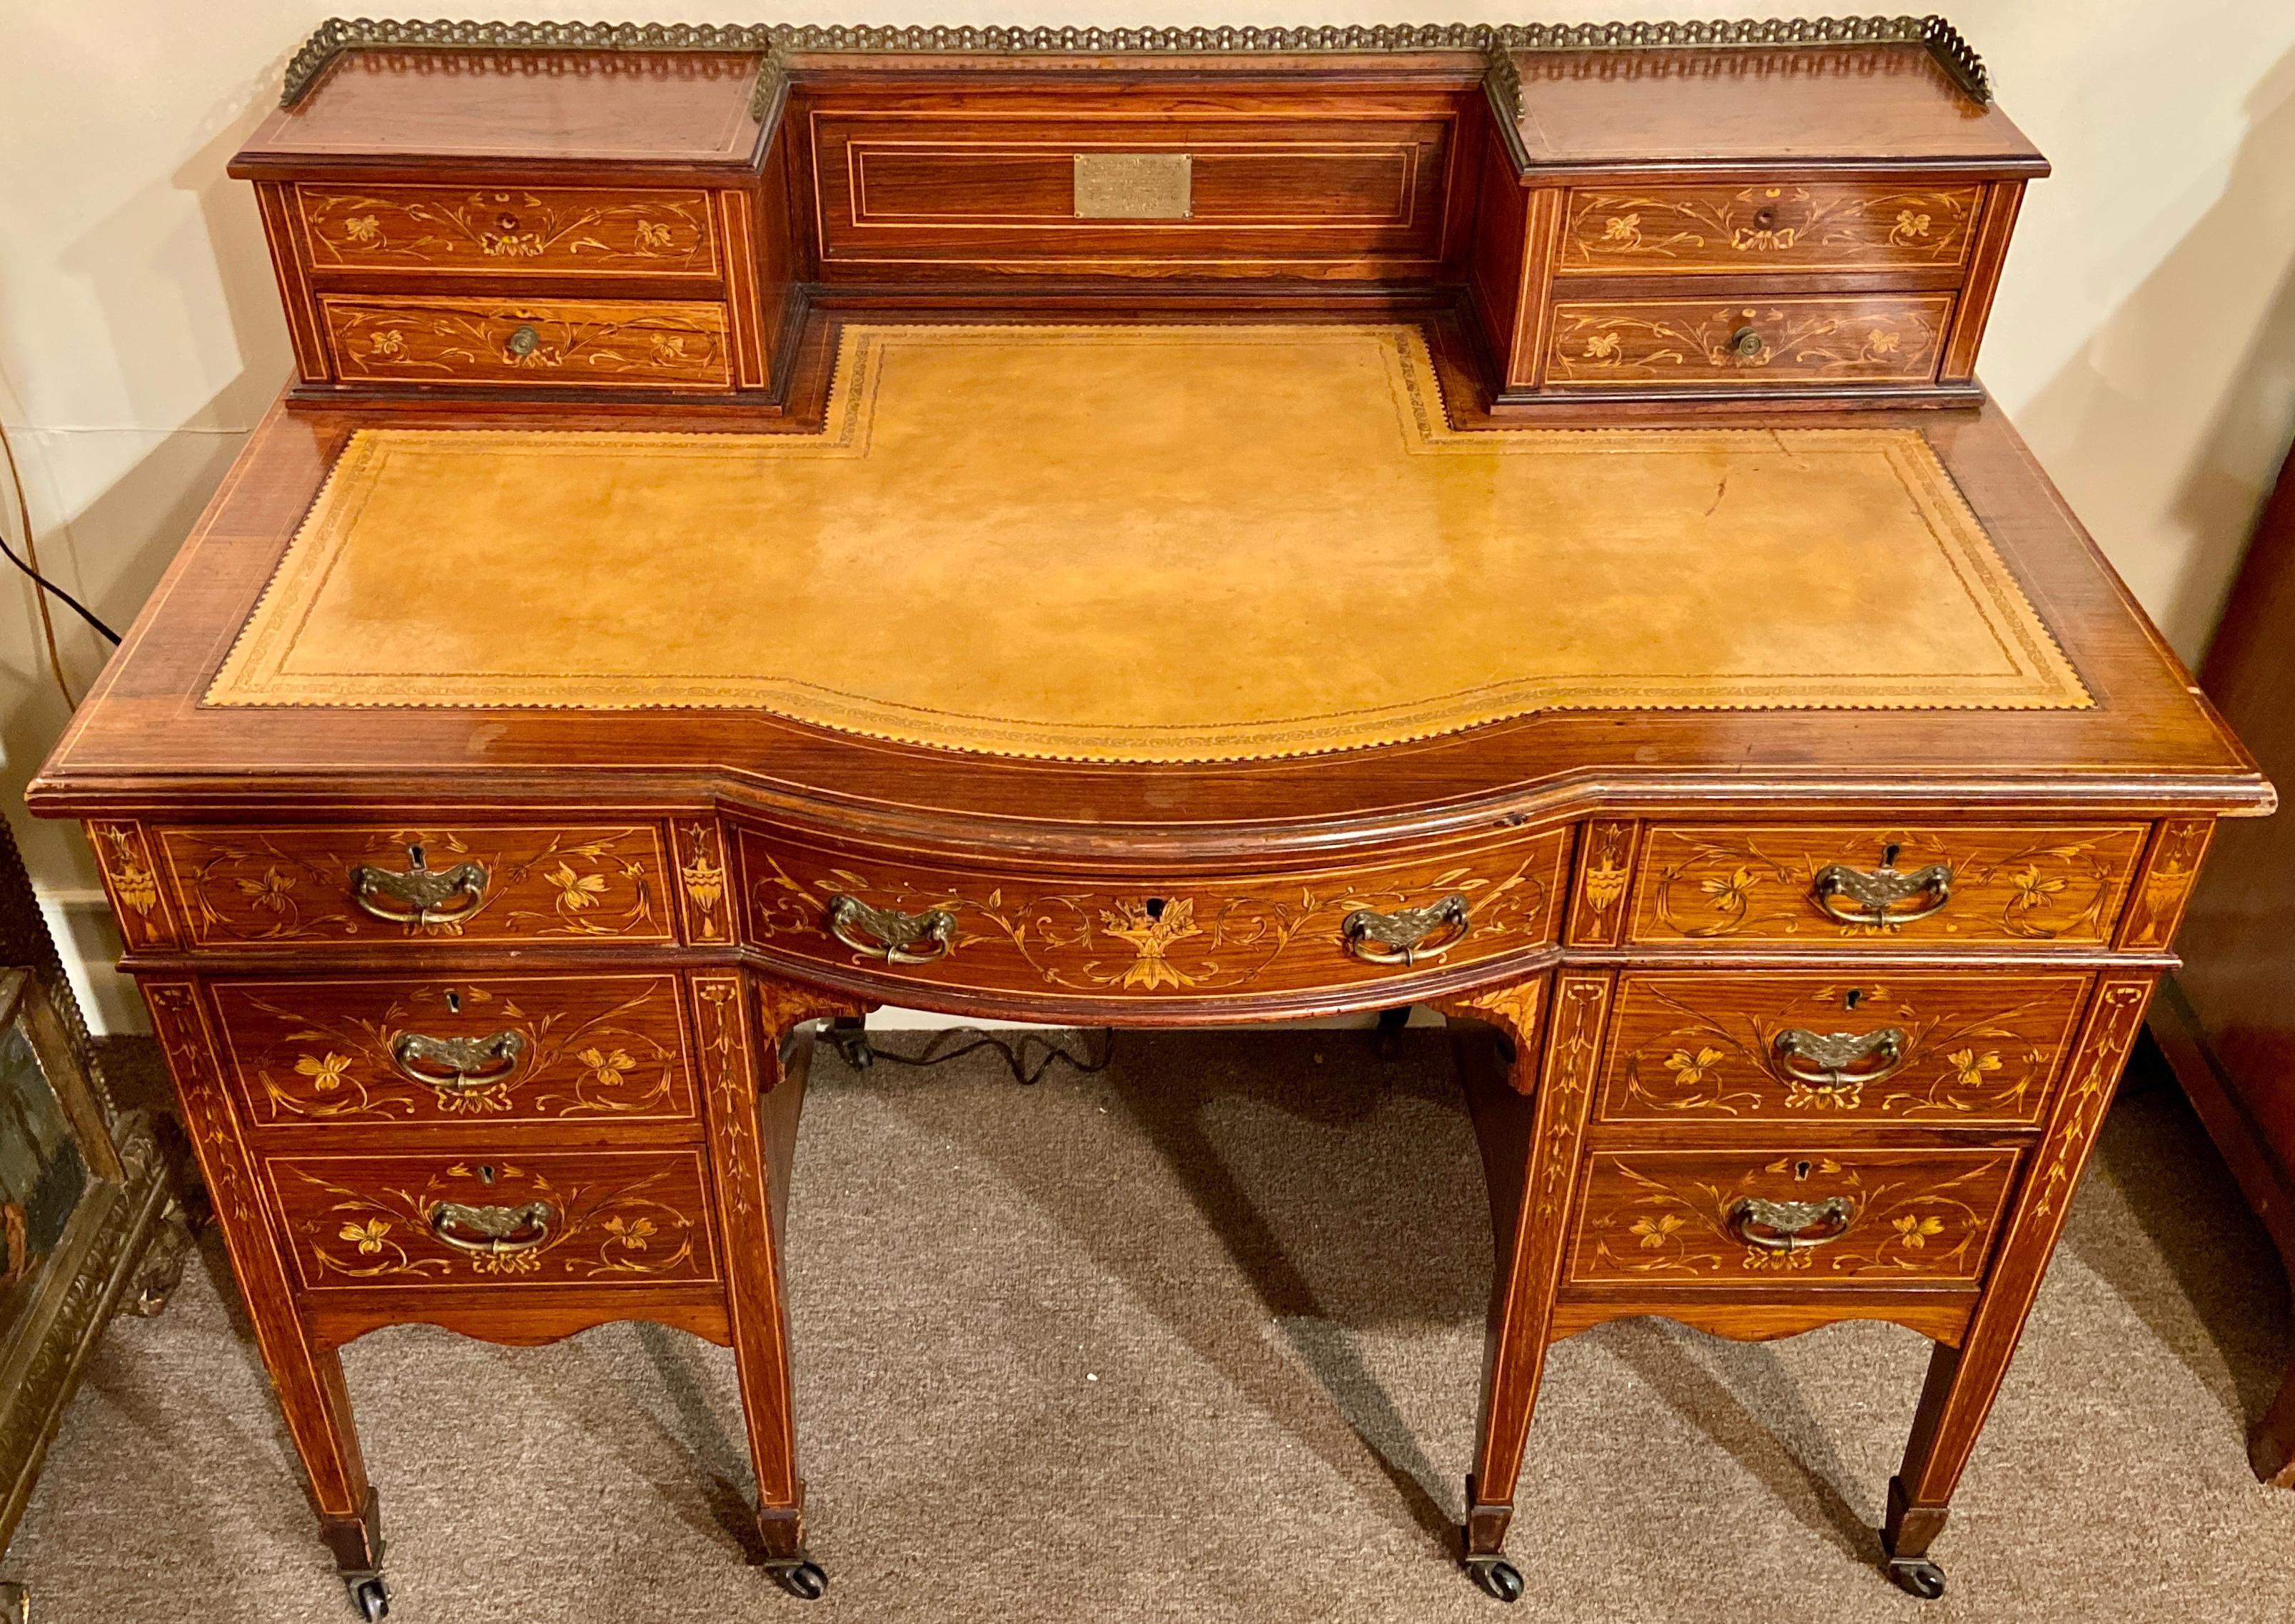 Antique English inlaid rosewood writing desk on casters with leather and galleried top, Circa 1890.